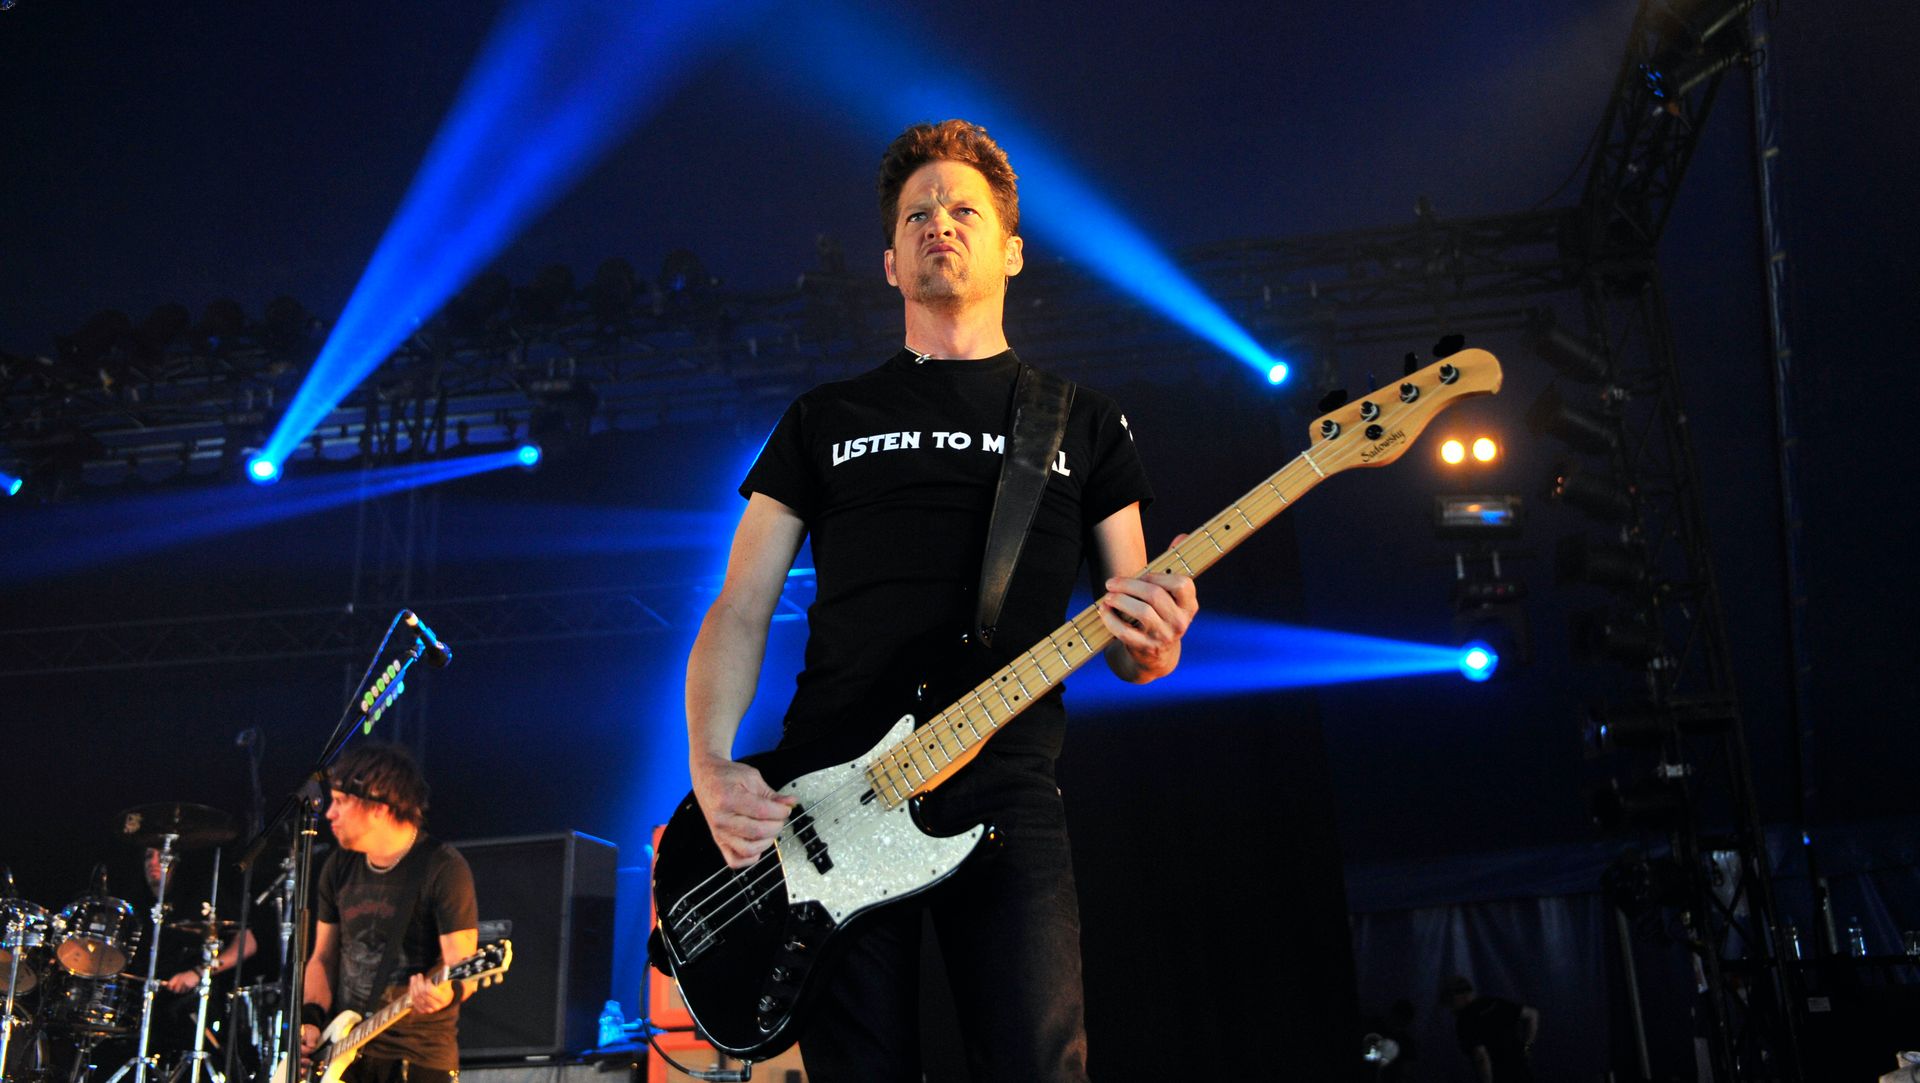 What Bass Did Jason Newsted Use